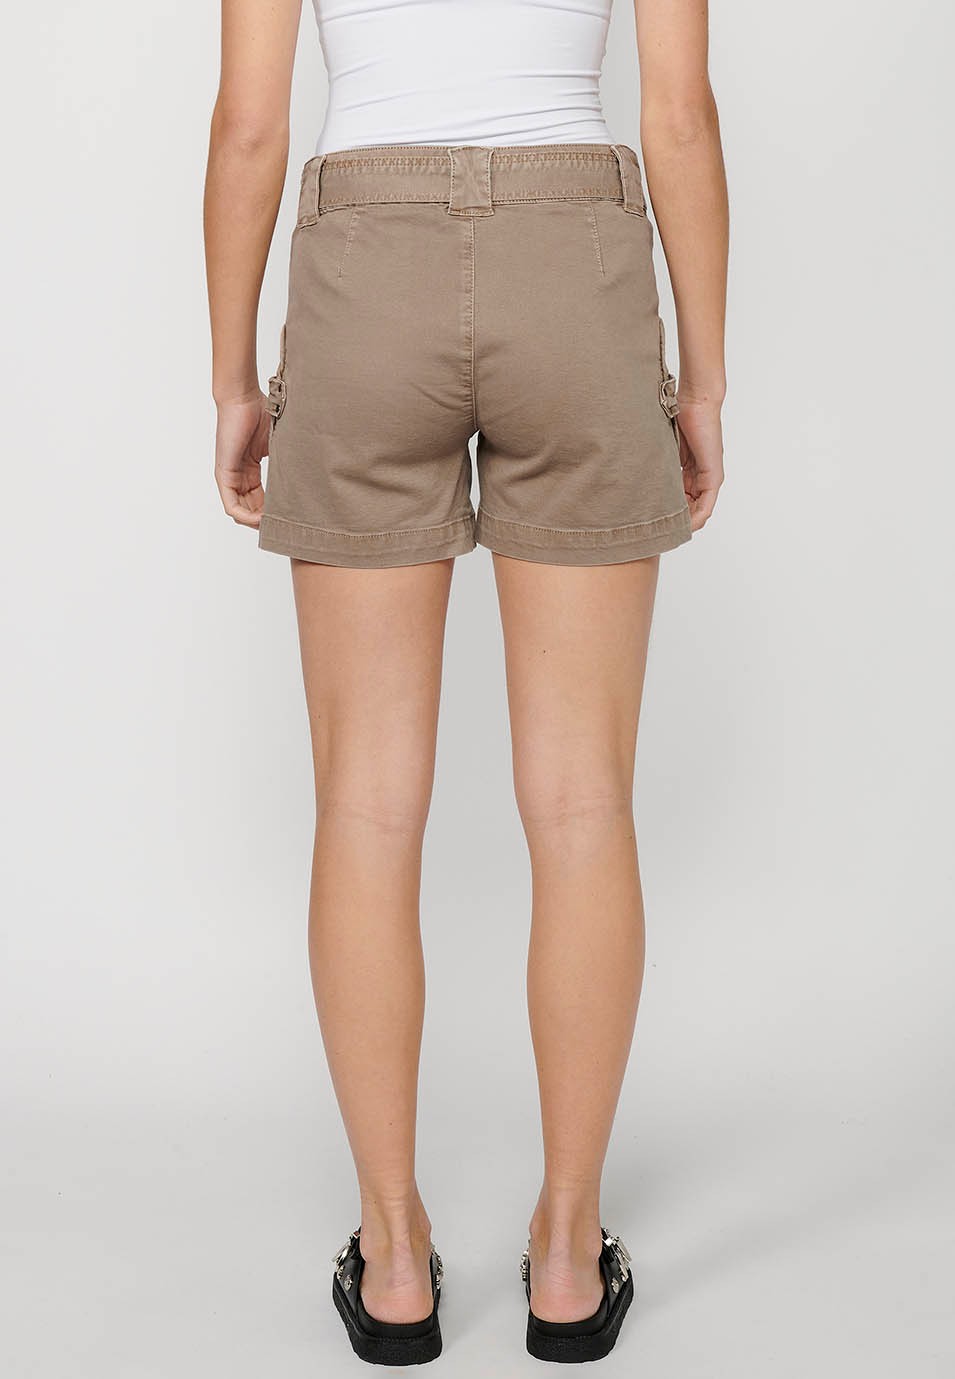 Beige Shorts with Belted Waist and Patch Pockets for Women